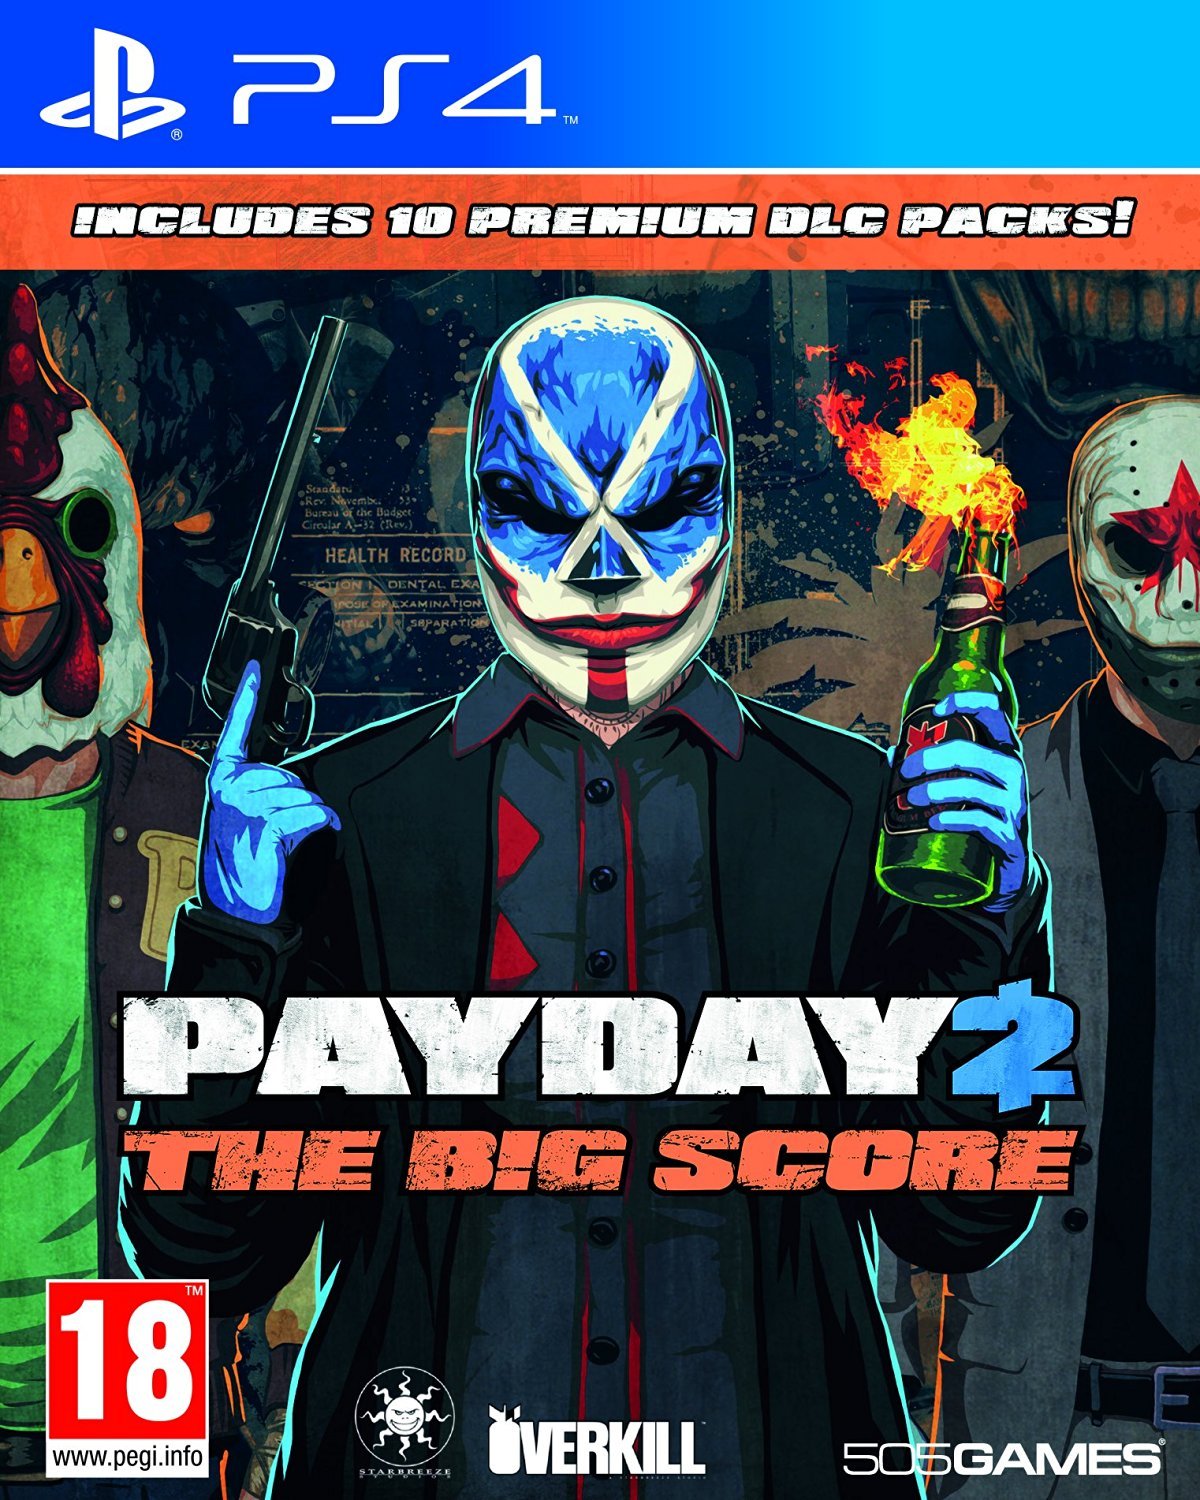 Game one payday 2 фото 96